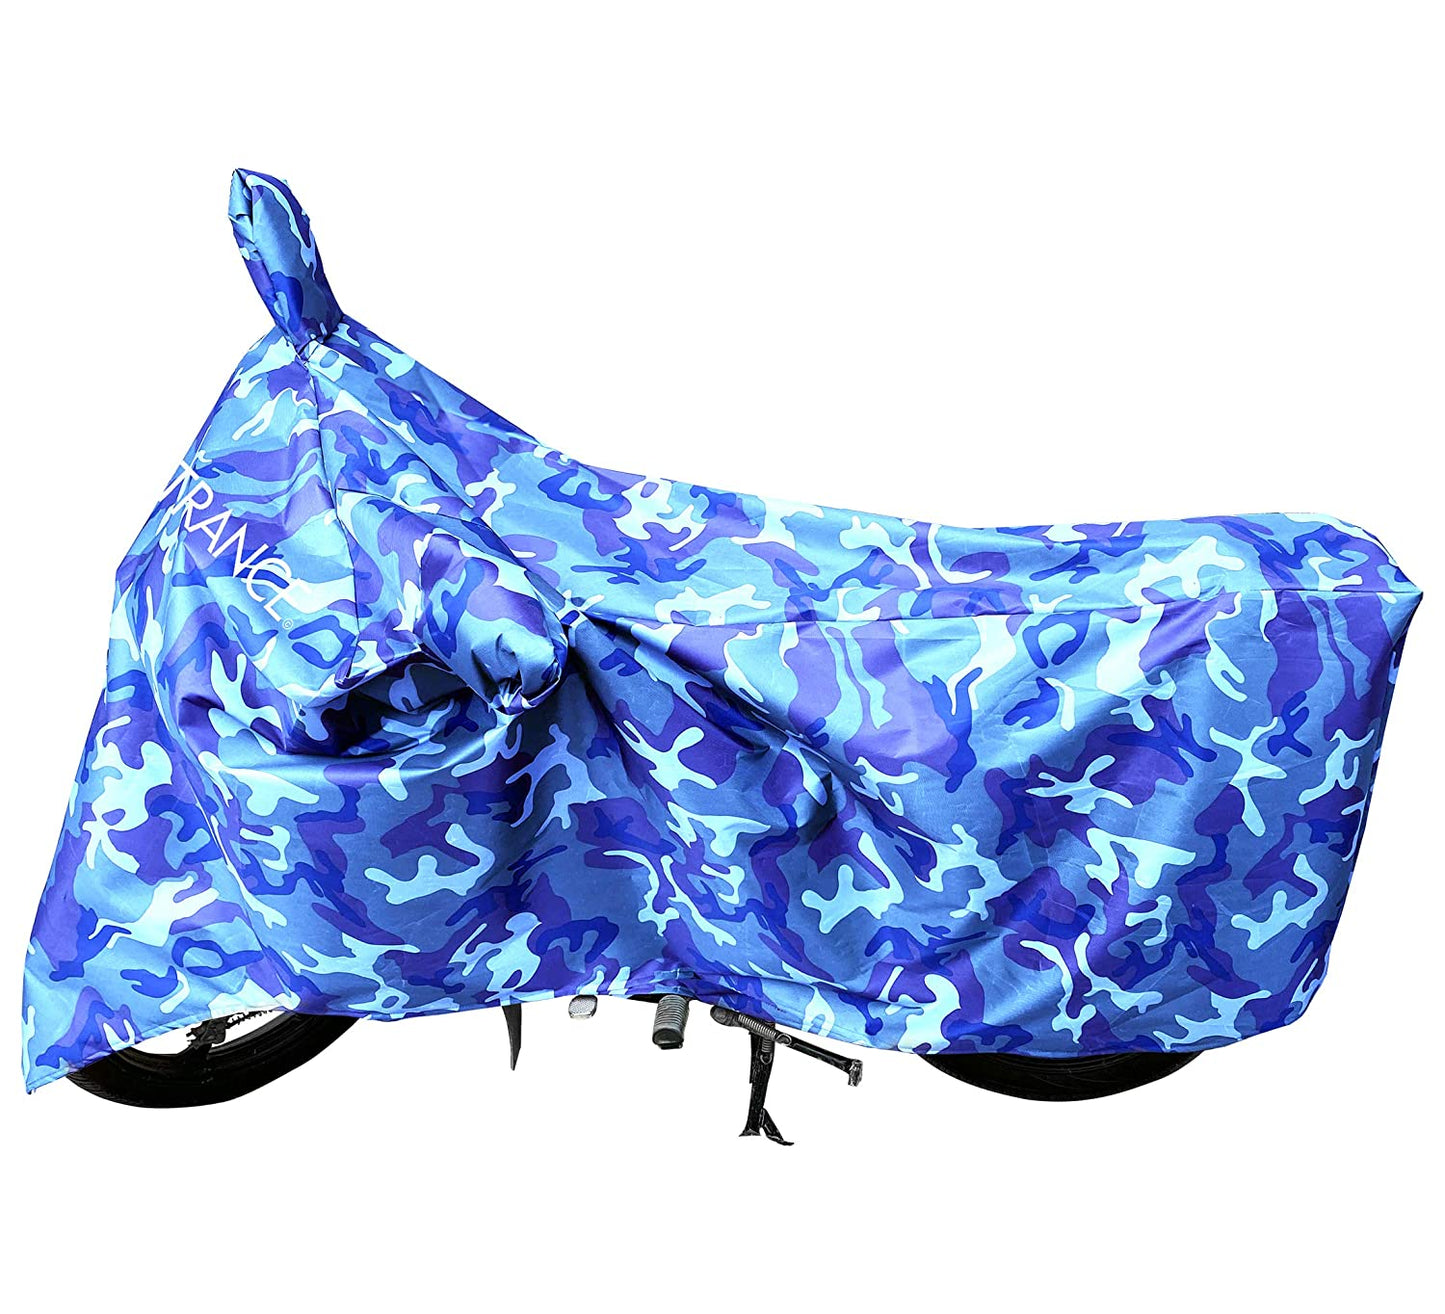 MotoTrance Jungle Bike Body Covers For TVS Apache 160 Fi - Interlock-Stitched Waterproof and Heat Resistant with Mirror Pockets